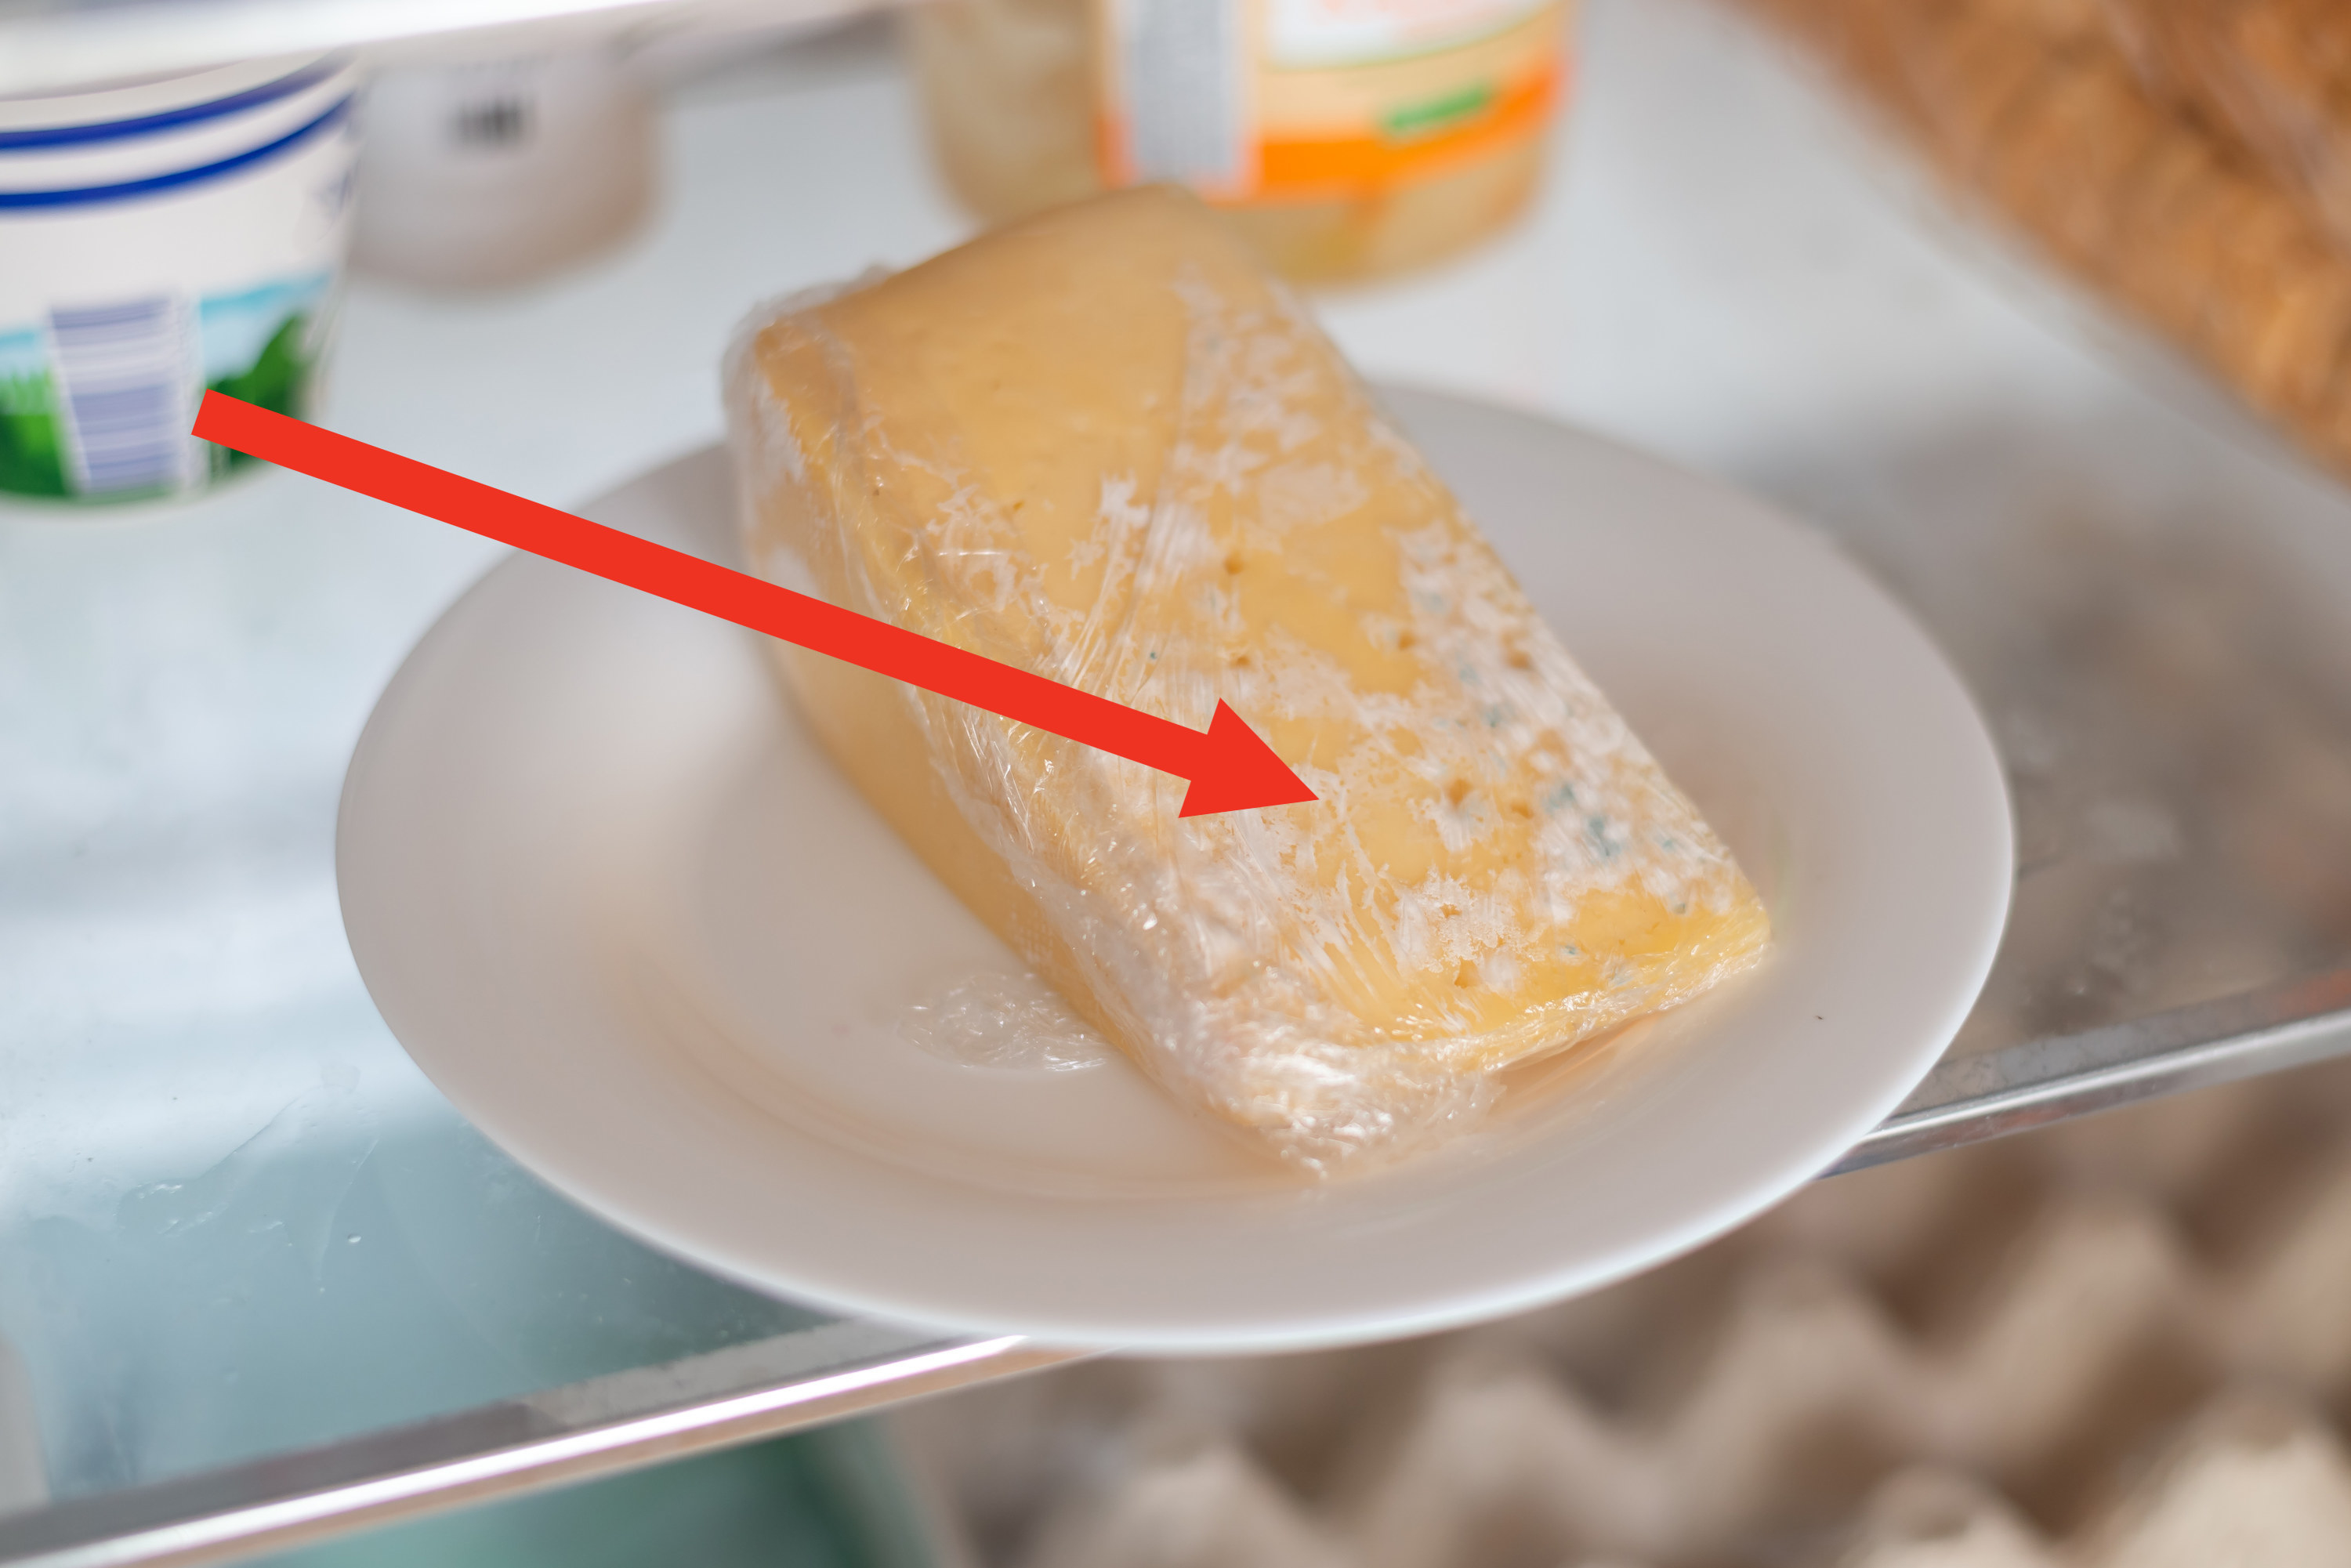 Red arrow pointing to bits of mold on a wedge of hard cheese